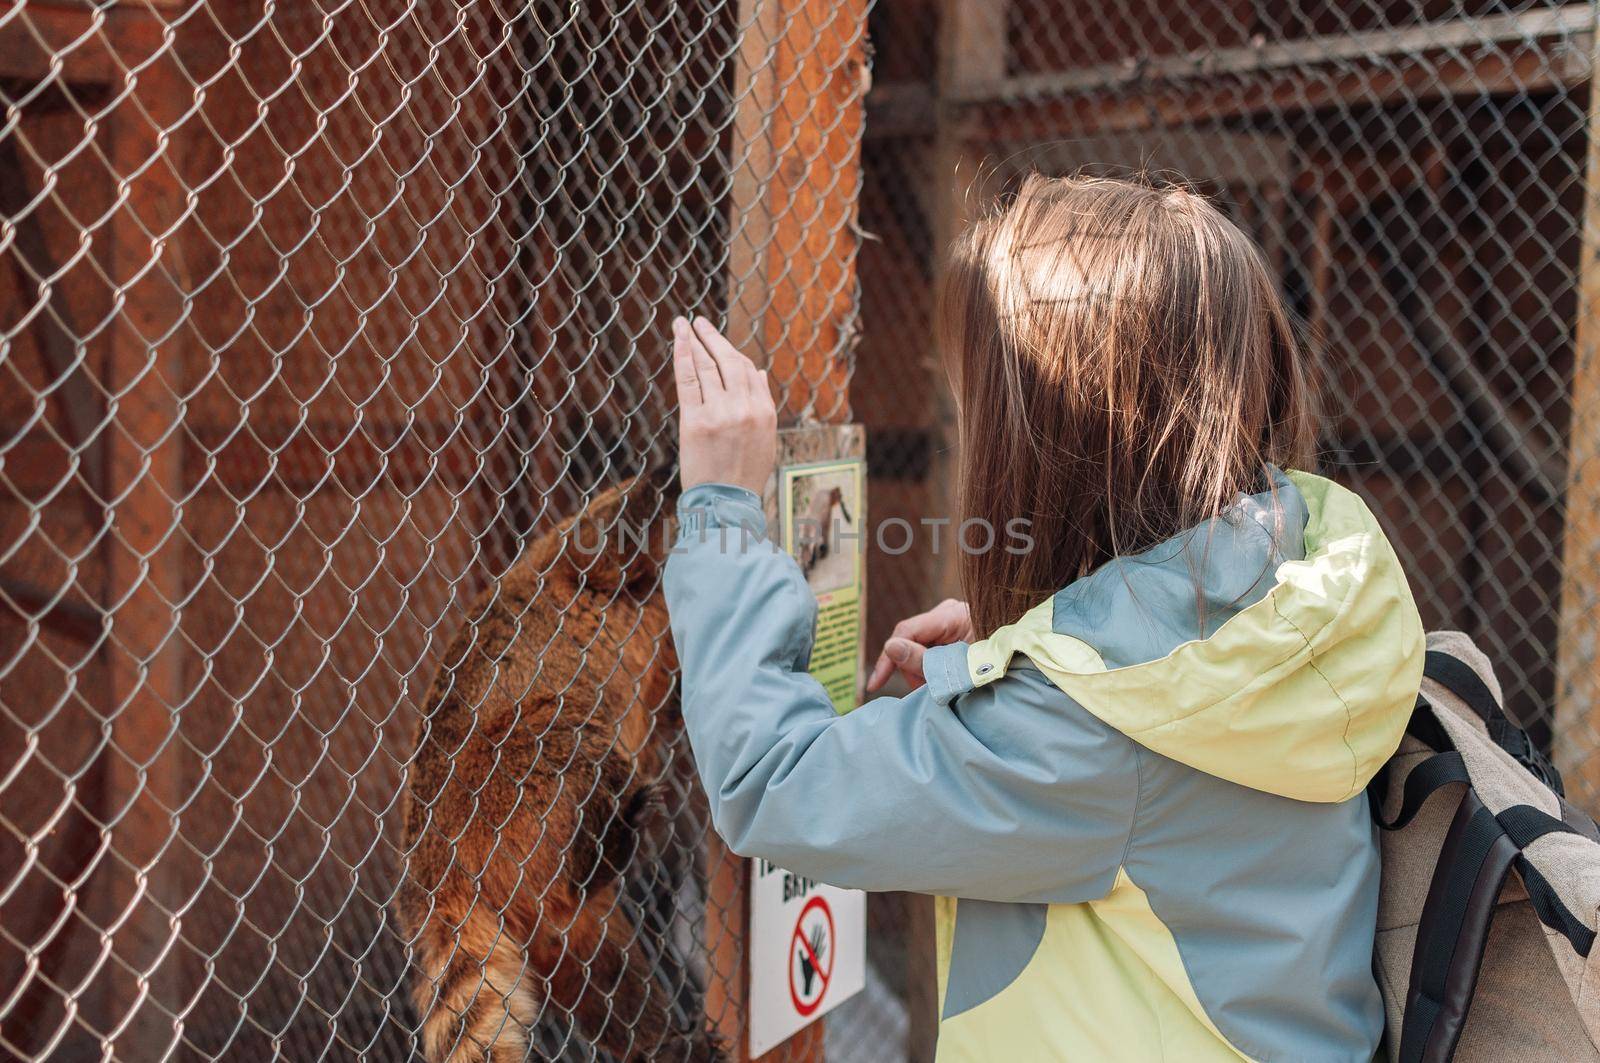 A coati climbs a cage grid at the family zoo. The girl tries to feed the nimble nasua through the bars. Wild animals out of will by Alla_Morozova93